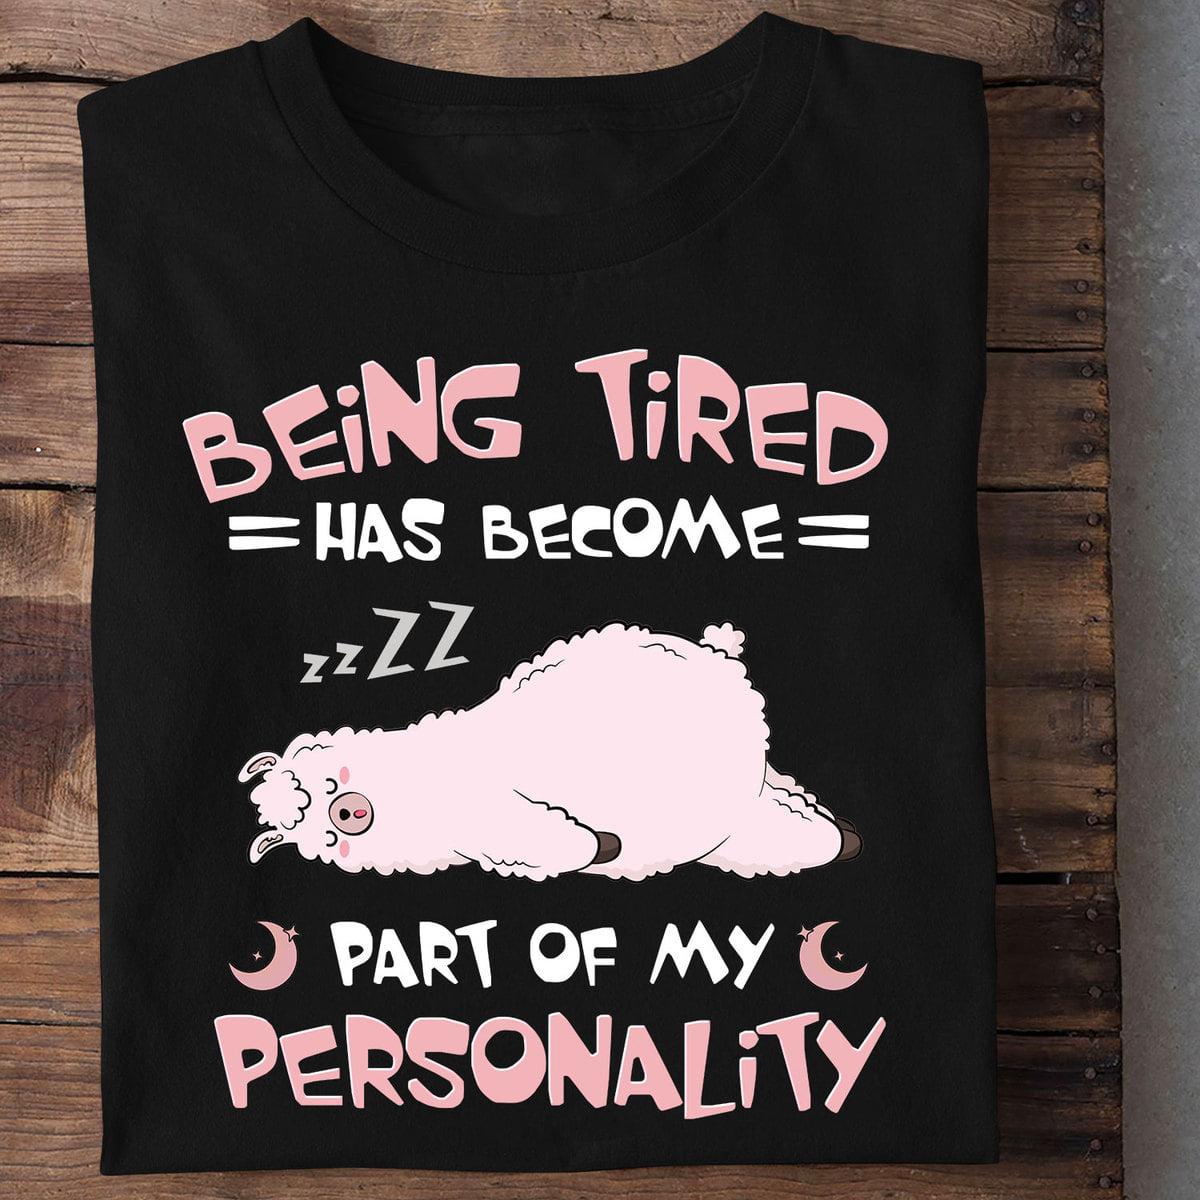 Being tired has become part of my personality - Sleeping white Llama, Being tired Llama